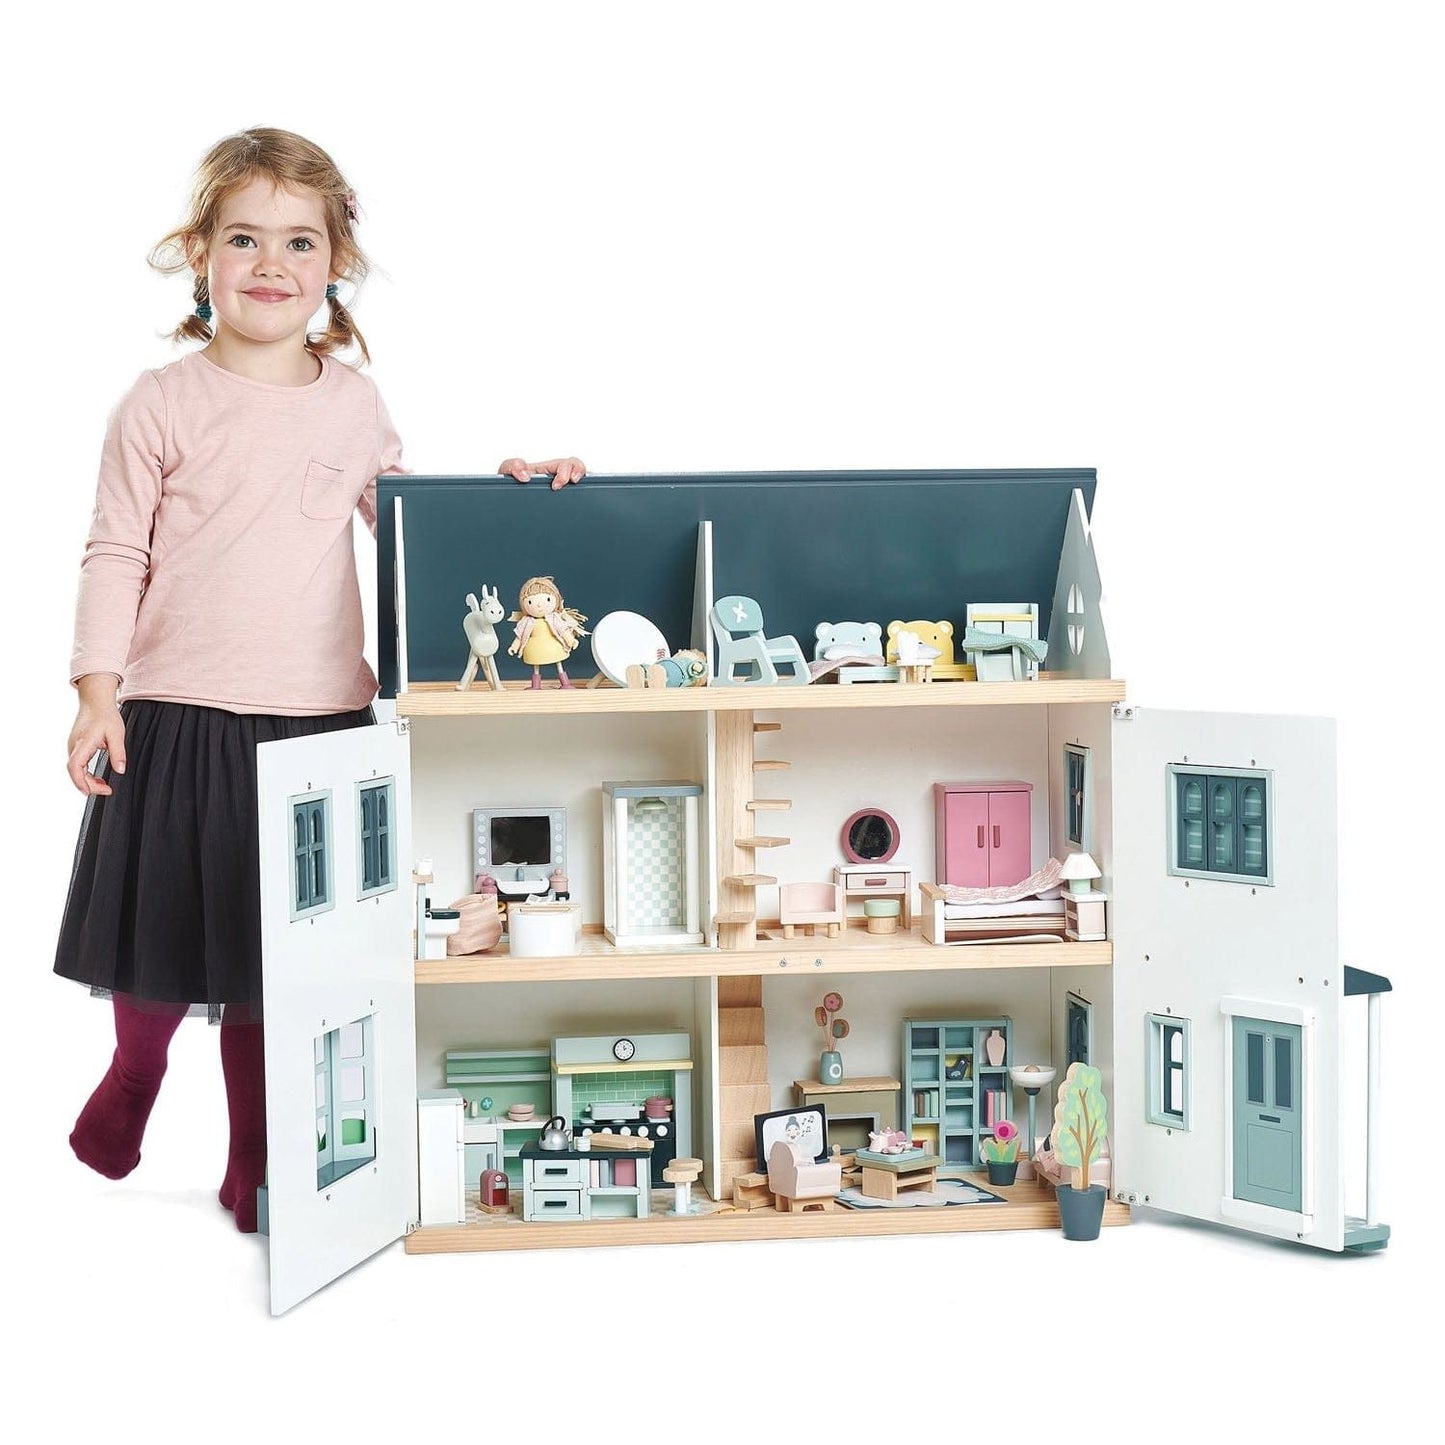 Dovetail House - The Online Toy Shop - Dollhouse - 5